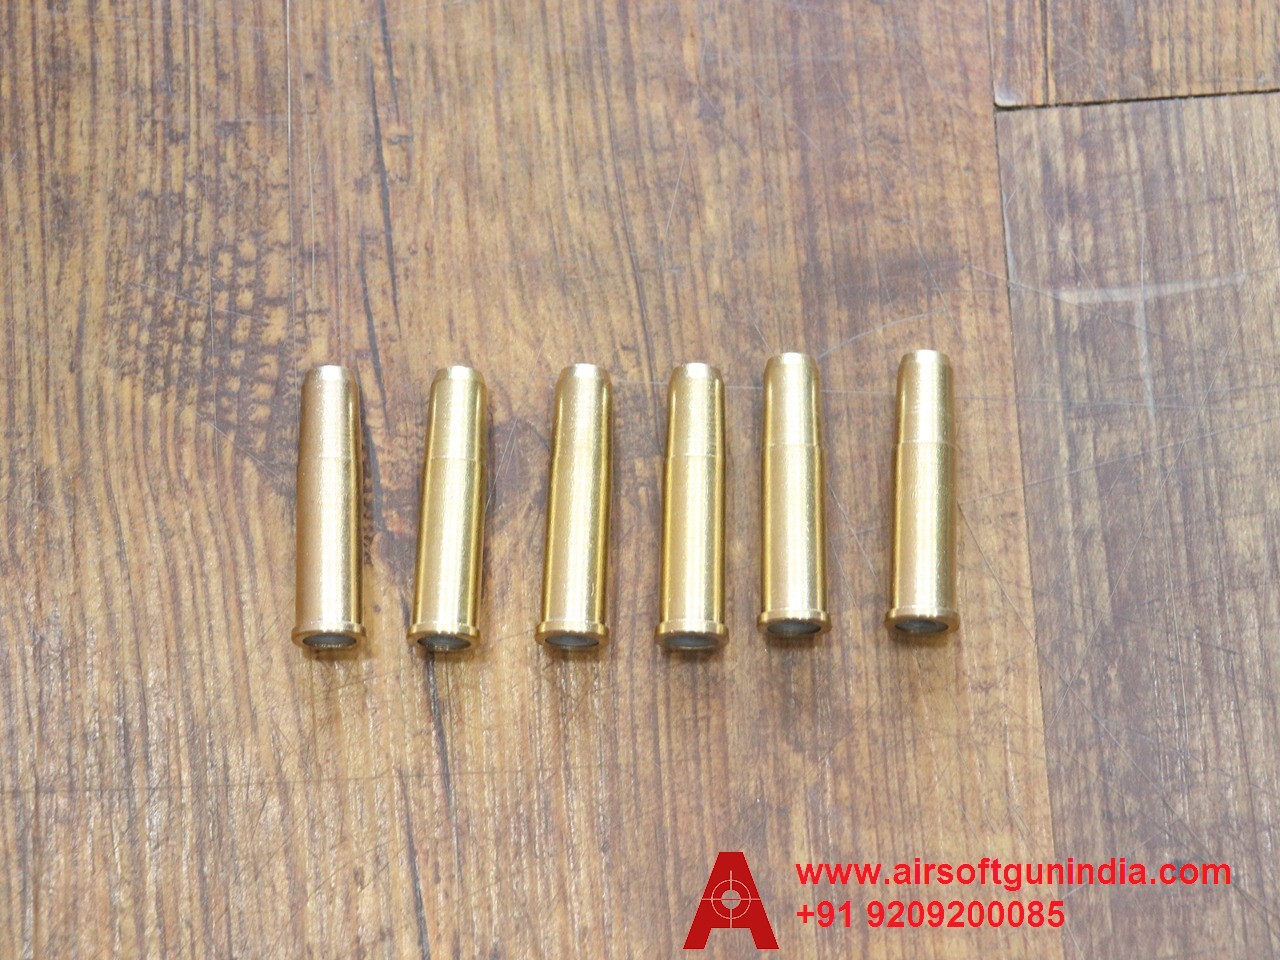 Pellet Shells For Dan Wesson / Legends S-25 .177 Caliber Co2 Revolvers, 6 Piece By Airsoft Gun India